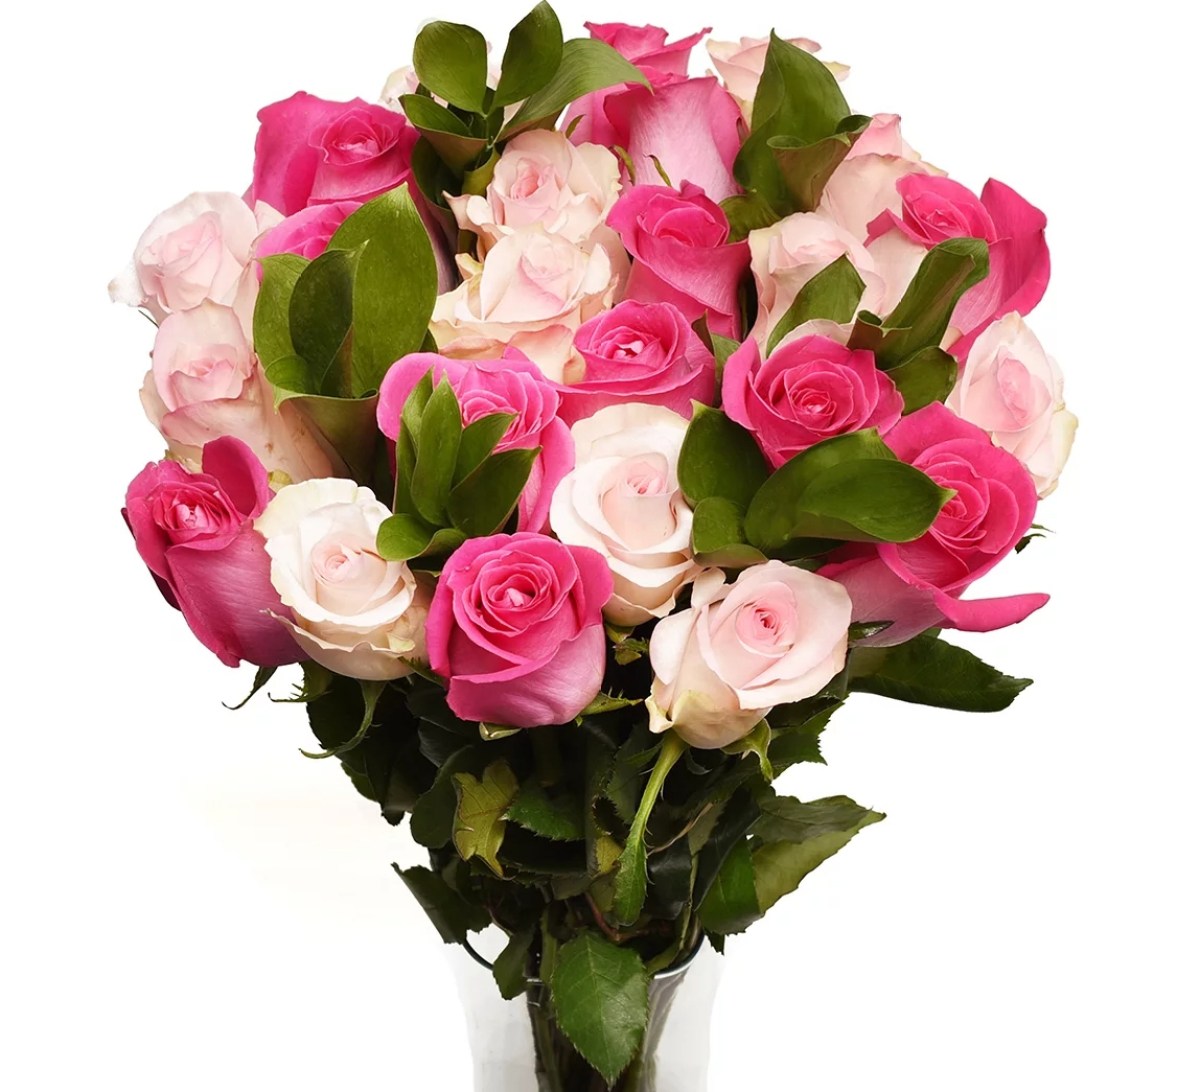 stock photo of pink roses